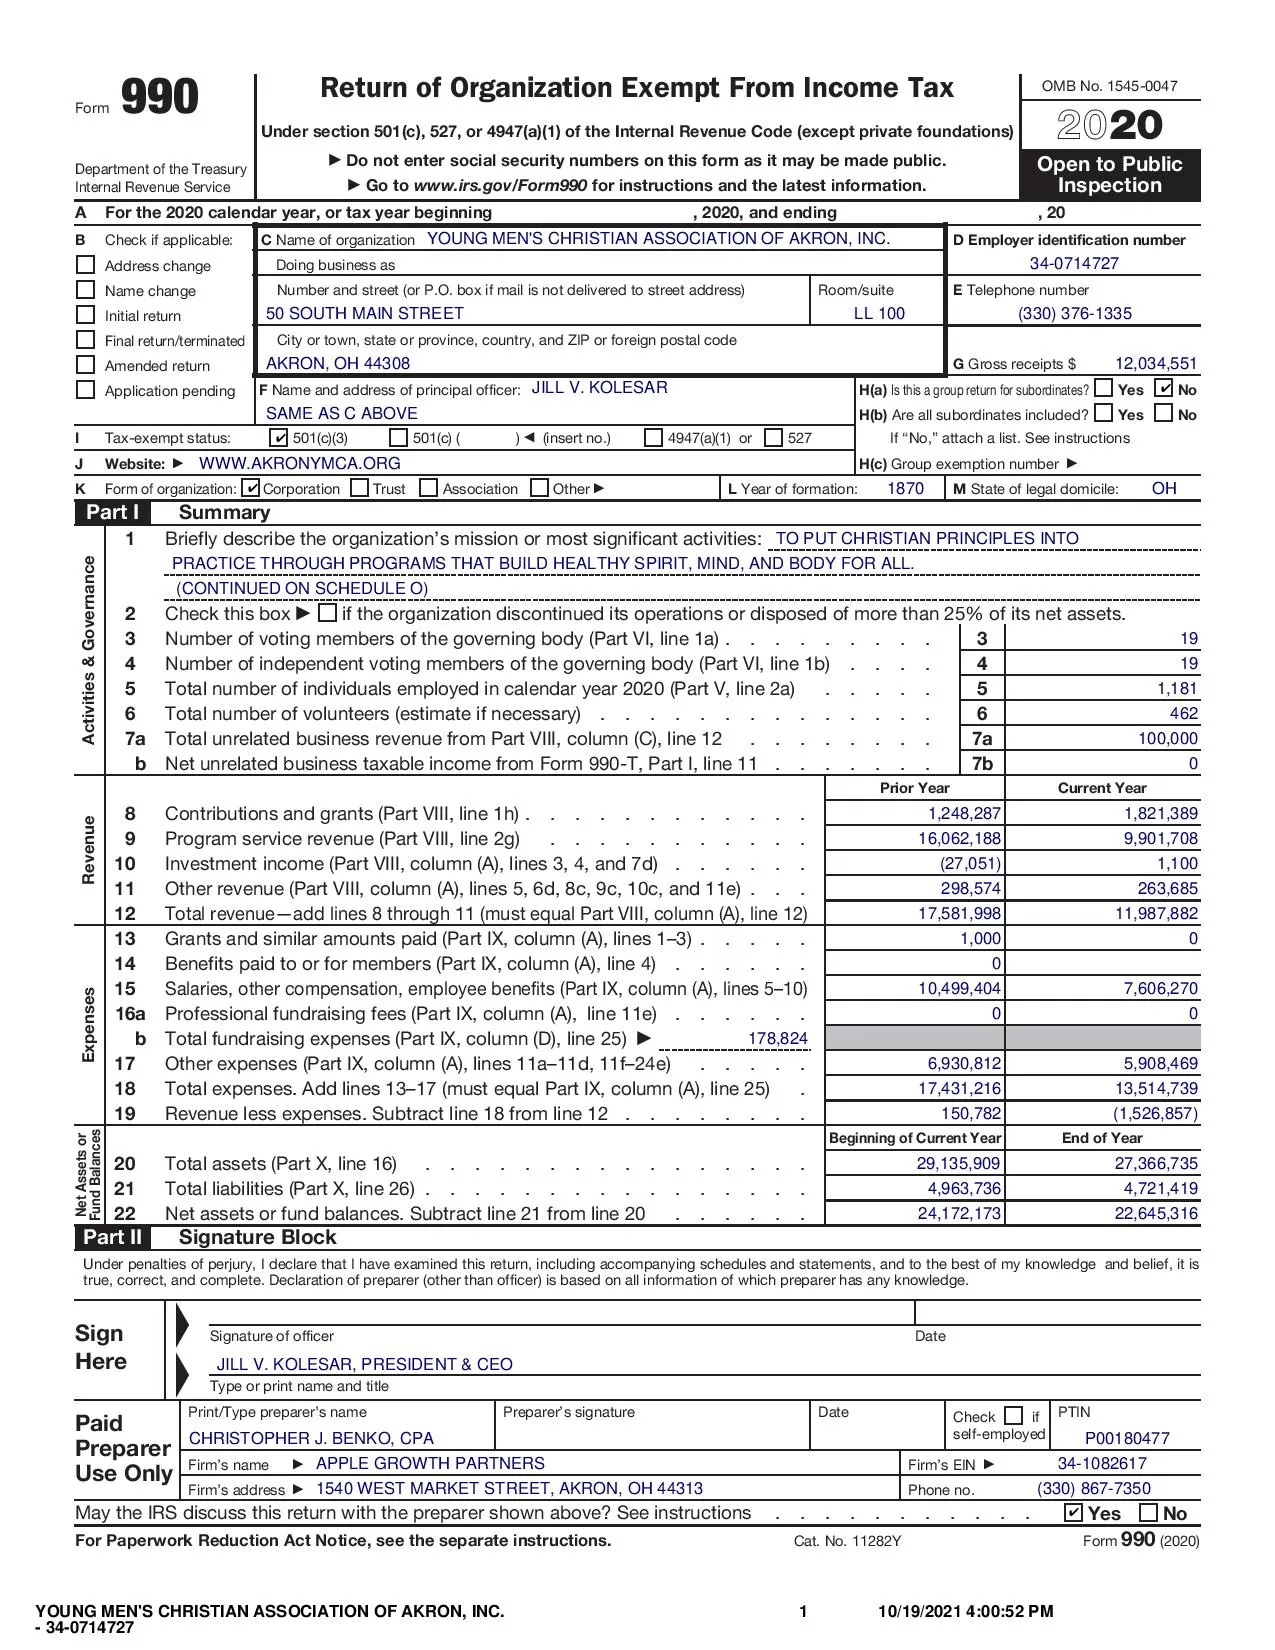 First page of IRS Form 990 in 2020